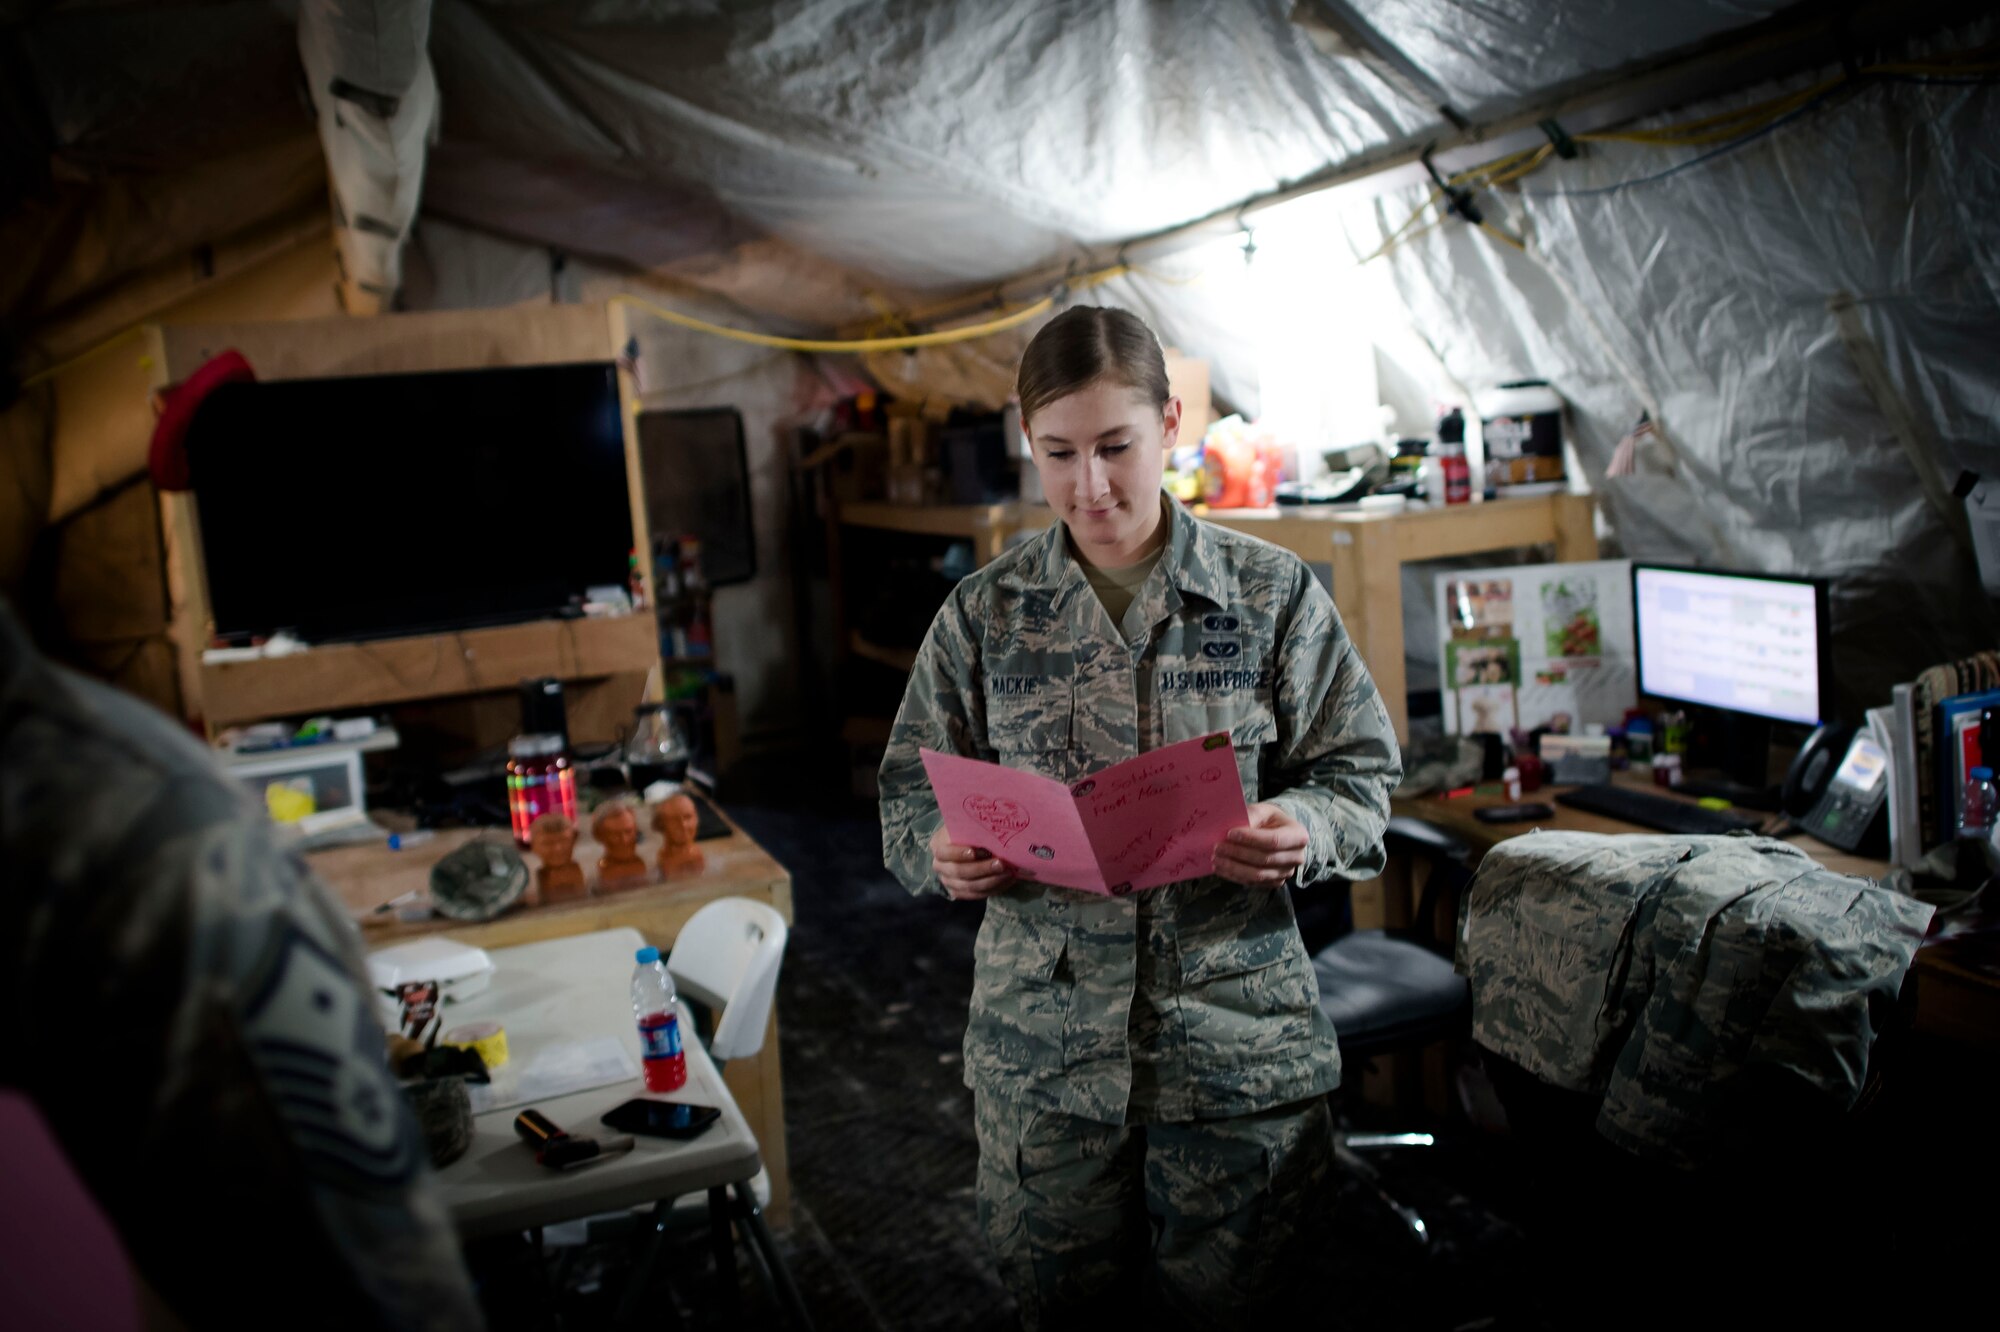 Airman 1st Class Meagan Mackie, 332nd Expeditionary Civil Engineer Squadron emergency management journeyman, reads a Valentine’s Day card, Feb. 14, 2017, in Southwest Asia. Students from Cape Cod, Massachusetts handcrafted cards for service members serving overseas. (U.S. Air Force photo by Staff Sgt. Eboni Reams)